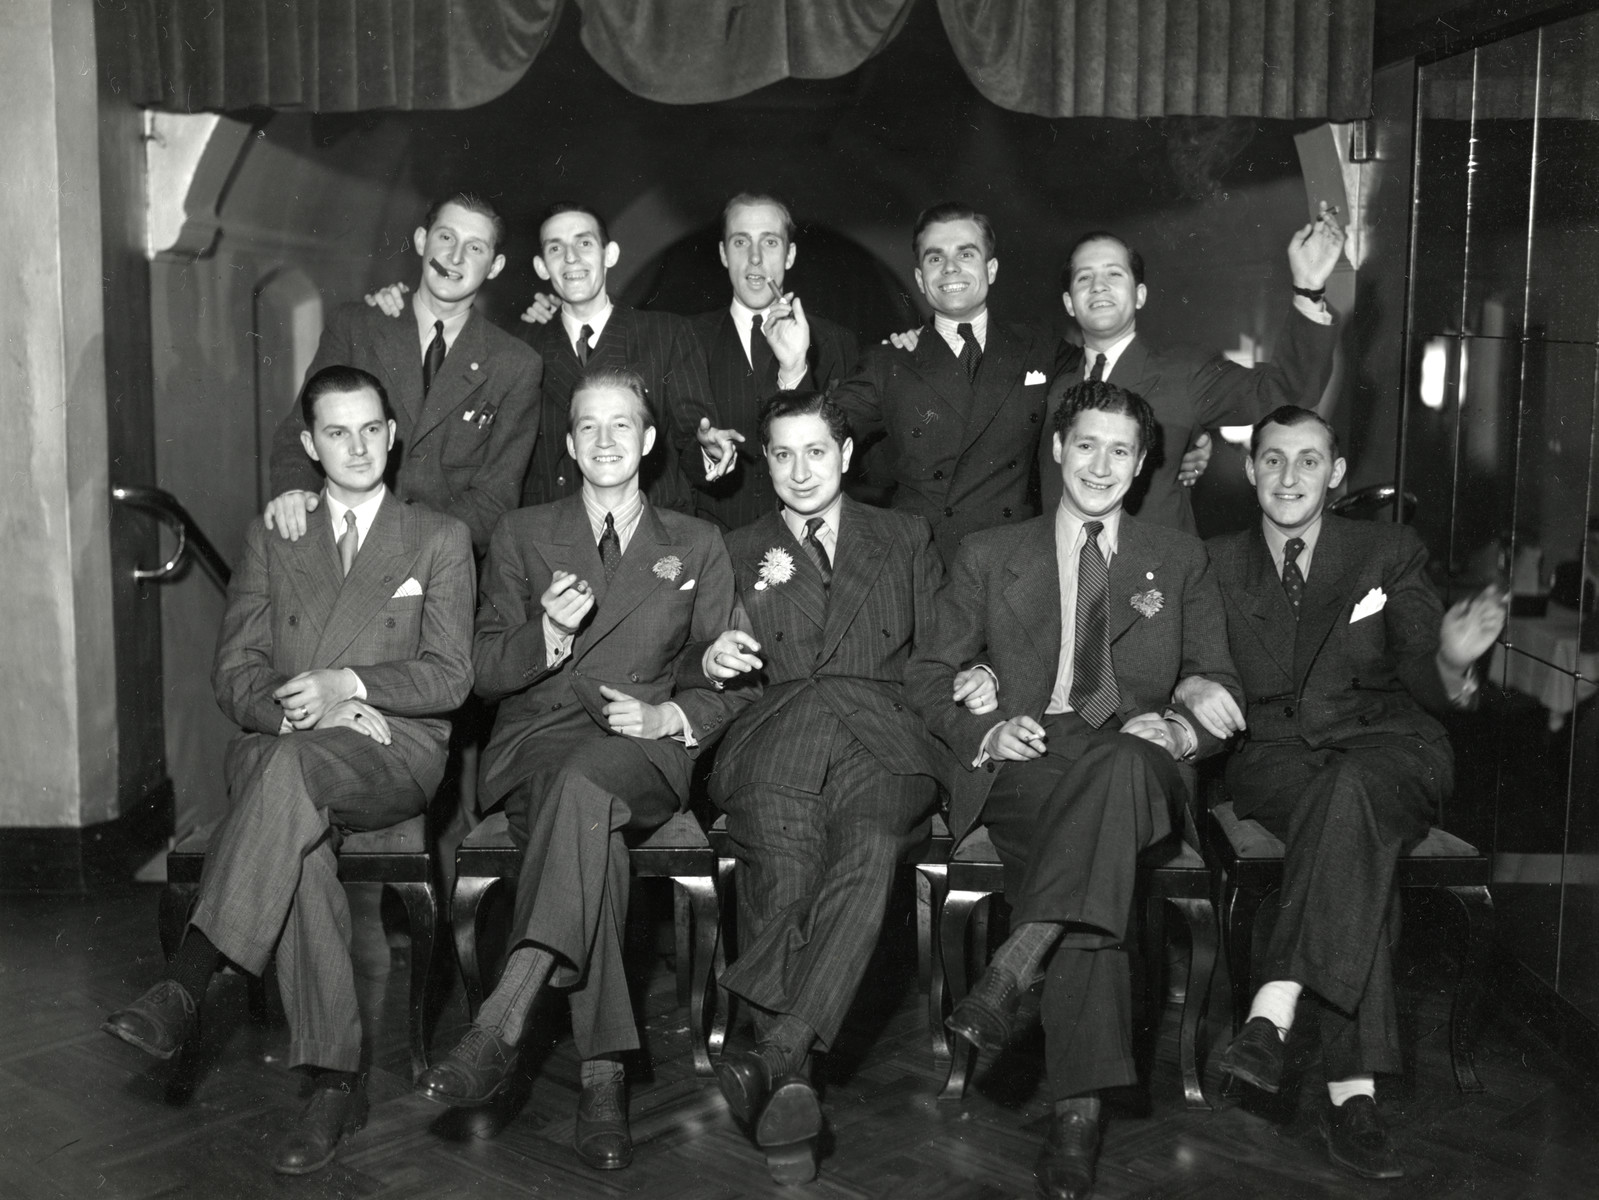 Group portrait of the members of the Judiska Ungdon, the Jewish social club in Malmo.

Elias Feigen is pictured in the front center.  His brother Bertil is to his right.  Hans Silver is seated on the far right.  Lennard Silwert is standing on the left.